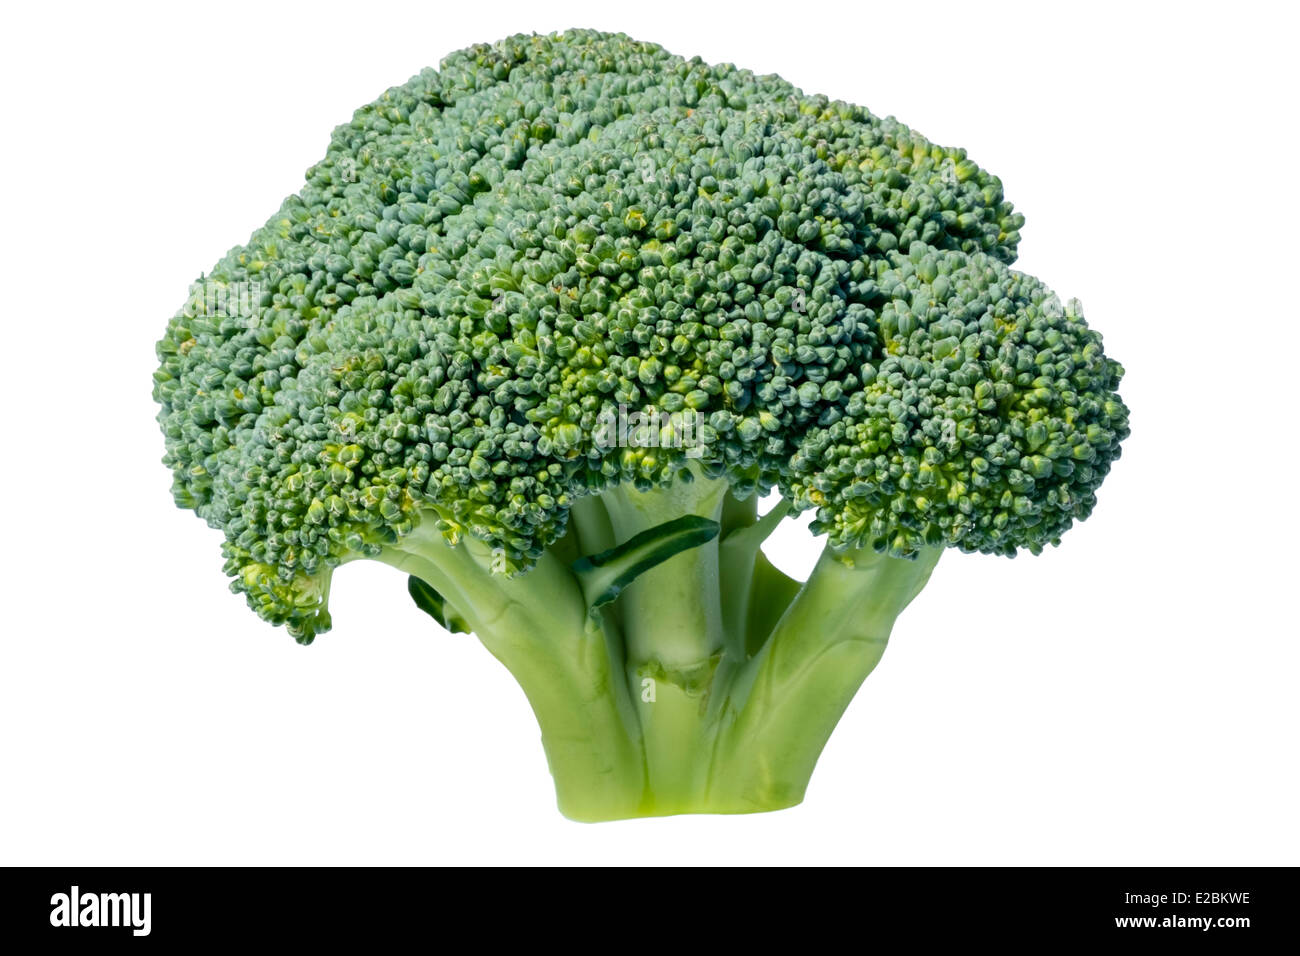 Broccoli cut out or isolated against a white background. Stock Photo